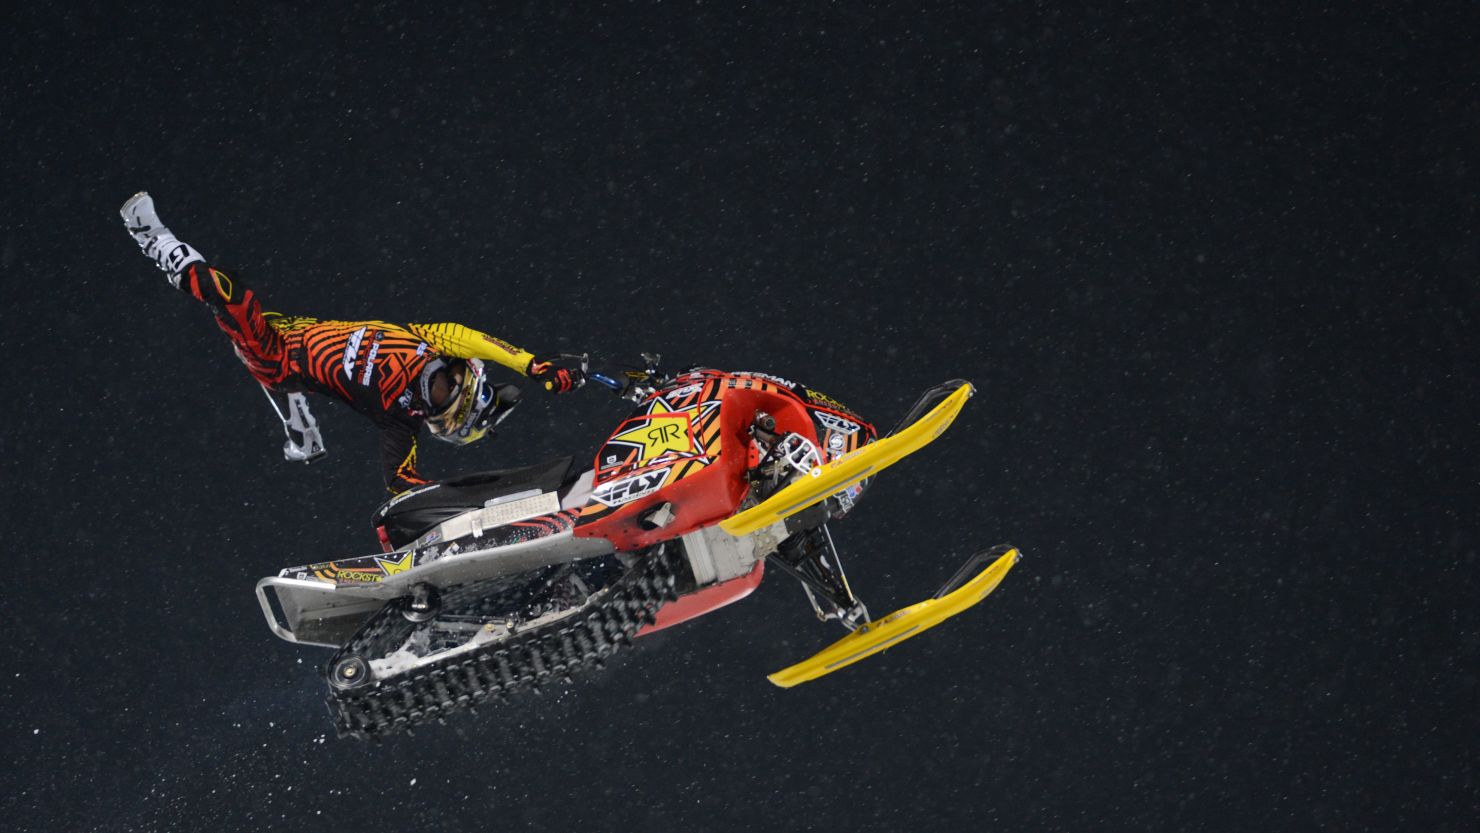 Caleb Moore competes in the Snowmobile Freestyle Final during X Games Aspen 2013.